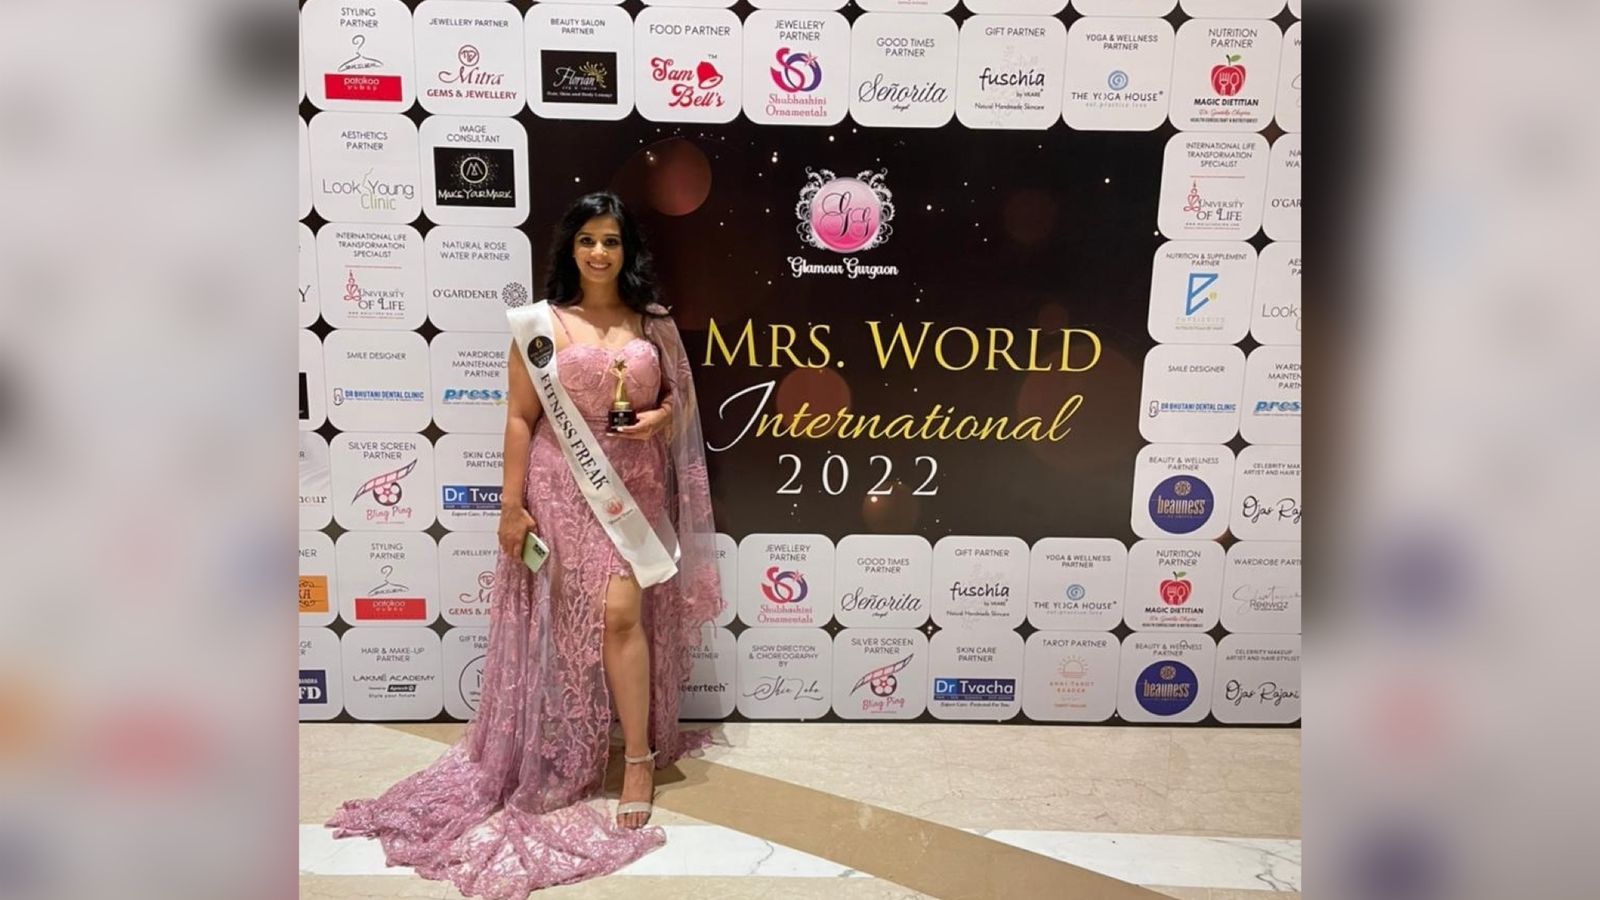 Khushbu Khetan, who lives in the small town of Biratnagar, Nepal, with her hard work and noble intentions won the title of Fitness Freak in the Mrs World International Show 2022